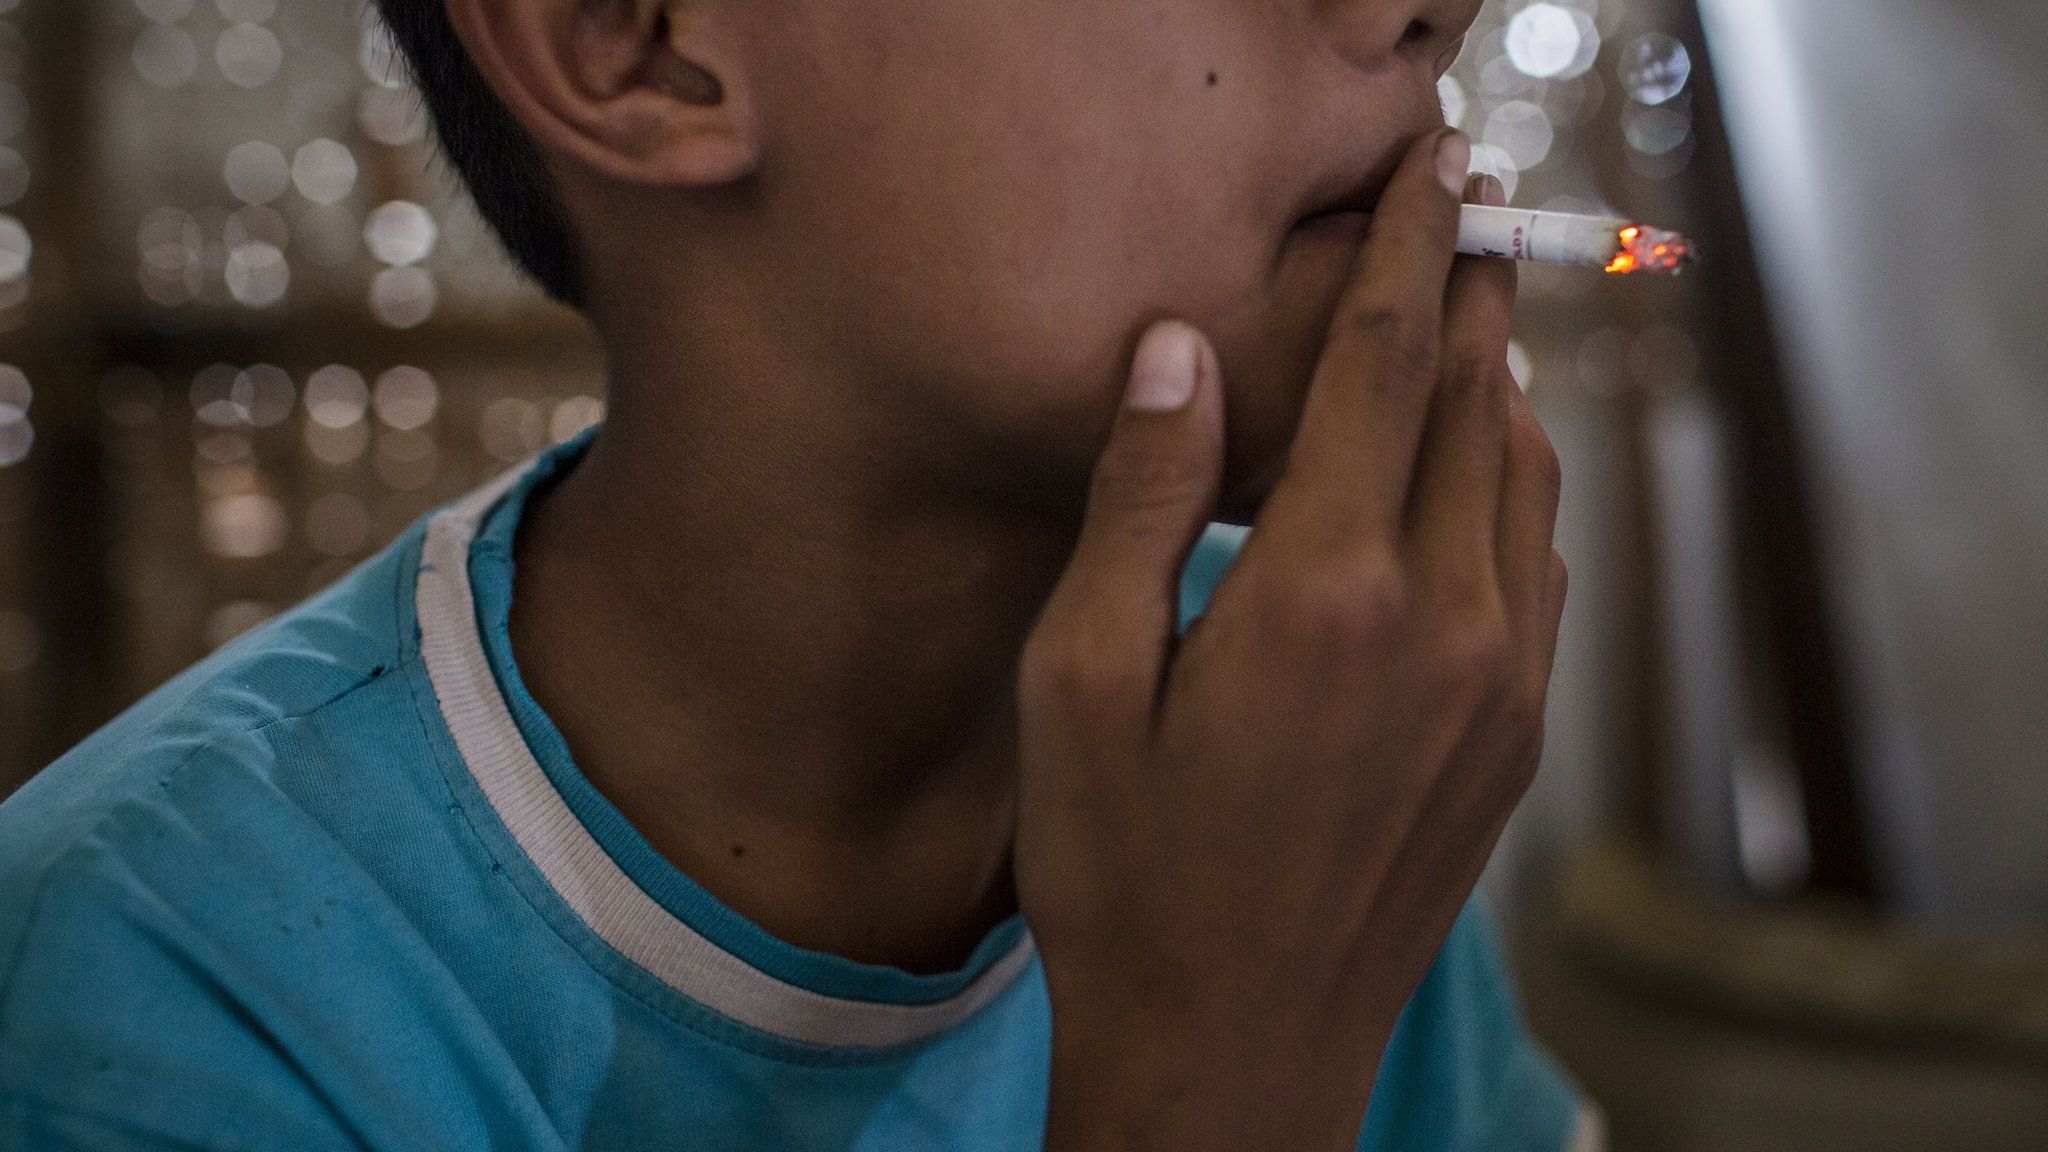 Teenager smokes at a kiosk on March 6, 2017 in Yogyakarta, Indonesia